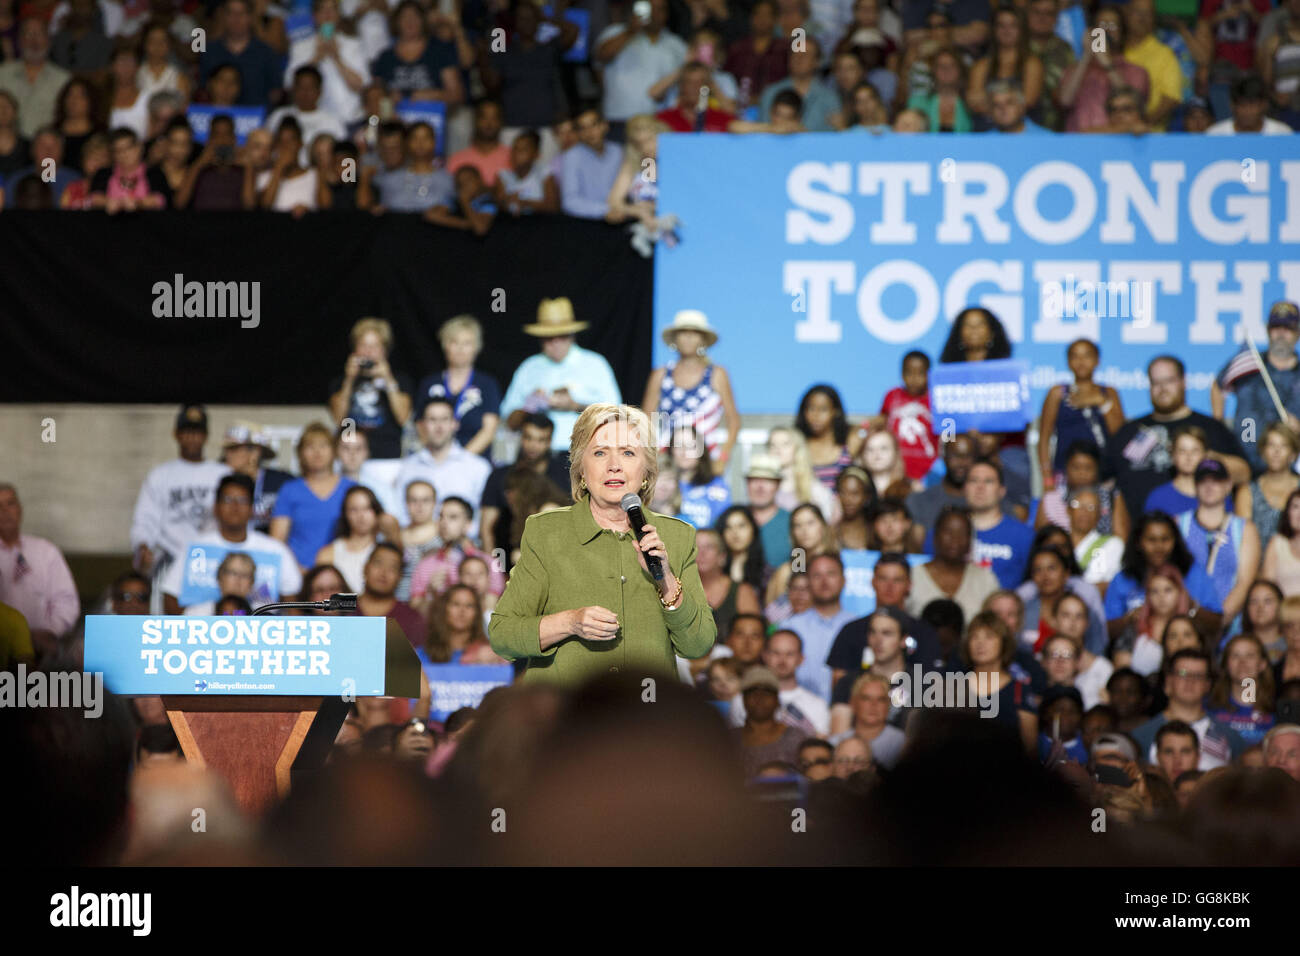 Tampa, Florida, USA. 22nd July, 2016. Hillary Clinton, presumptive 2016 Democratic presidential nominee, speaks during a campaign event in Tampa, Florida, U.S., on Friday, July 22, 2016. Clinton unveiled her choice of a running mate Friday night, seeking to recapture the attention of voters. © 2016 Patrick T. Fallon © Patrick Fallon/ZUMA Wire/Alamy Live News Stock Photo